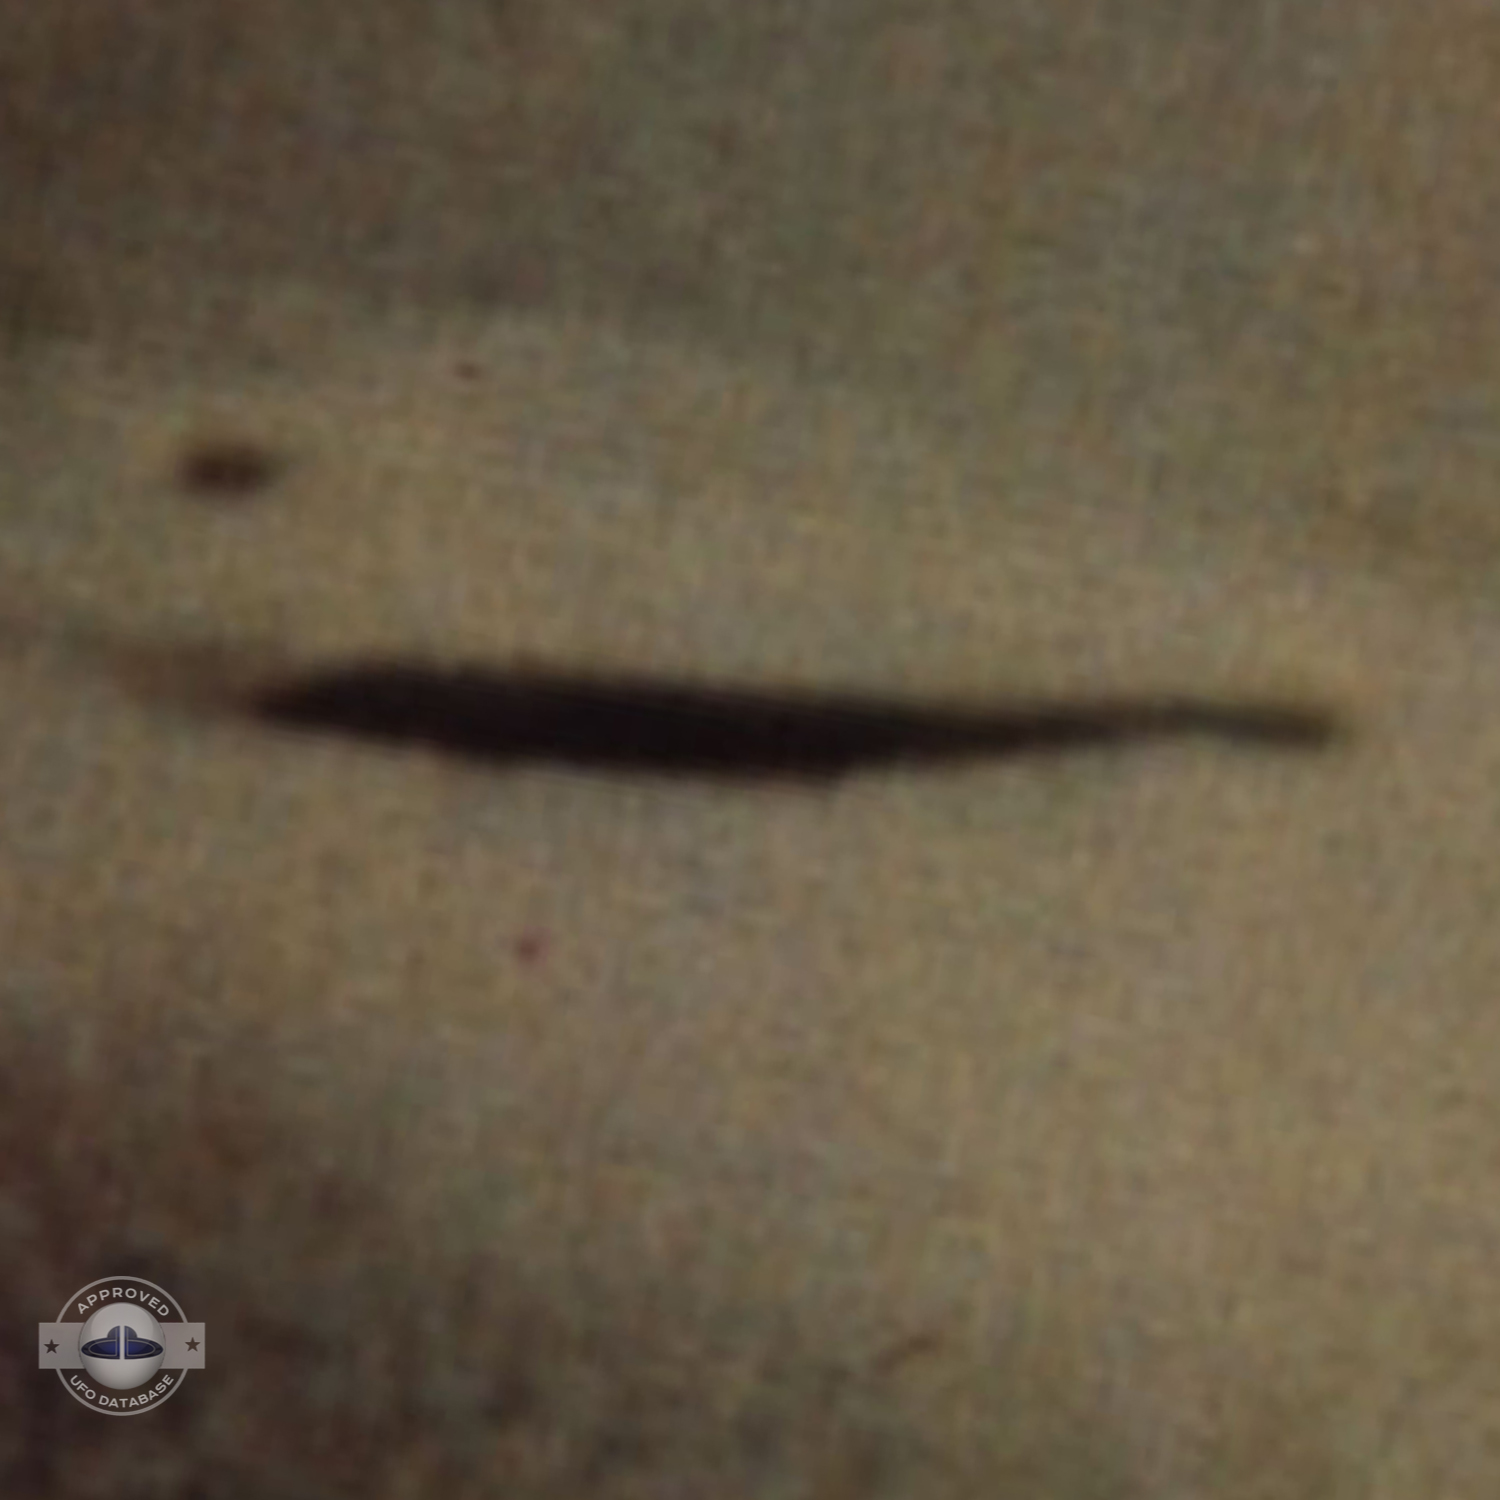 One of the oldest UFO picture taken in 1944 UFO over a house UFO Picture #33-4